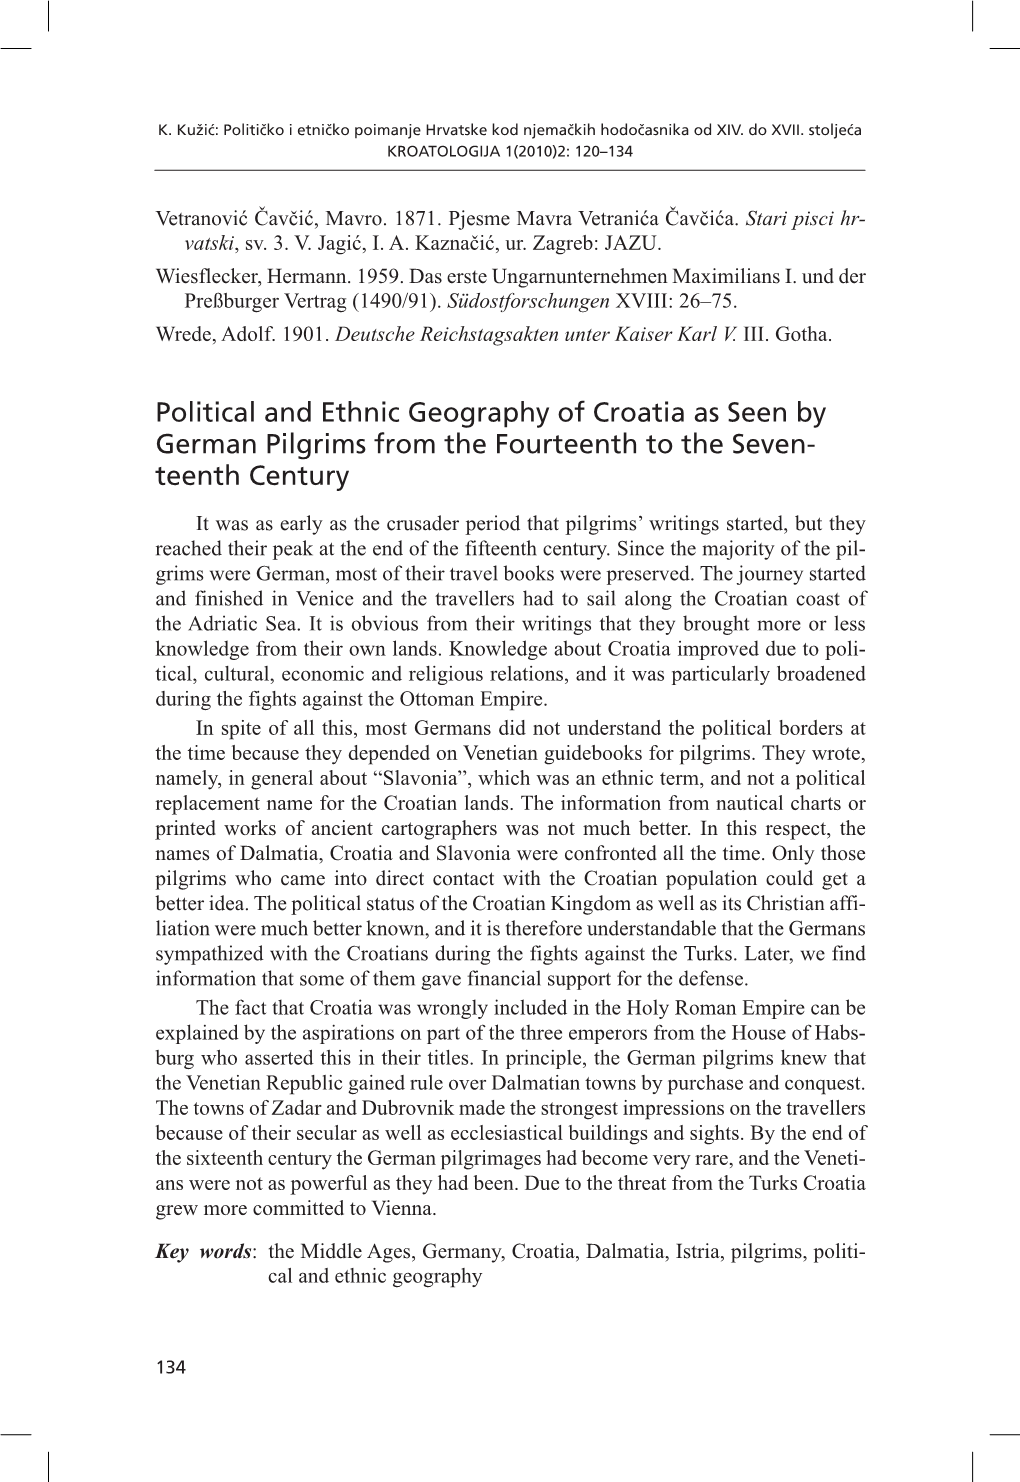 Political and Ethnic Geography of Croatia As Seen by German Pilgrims from the Fourteenth to the Seven- Teenth Century